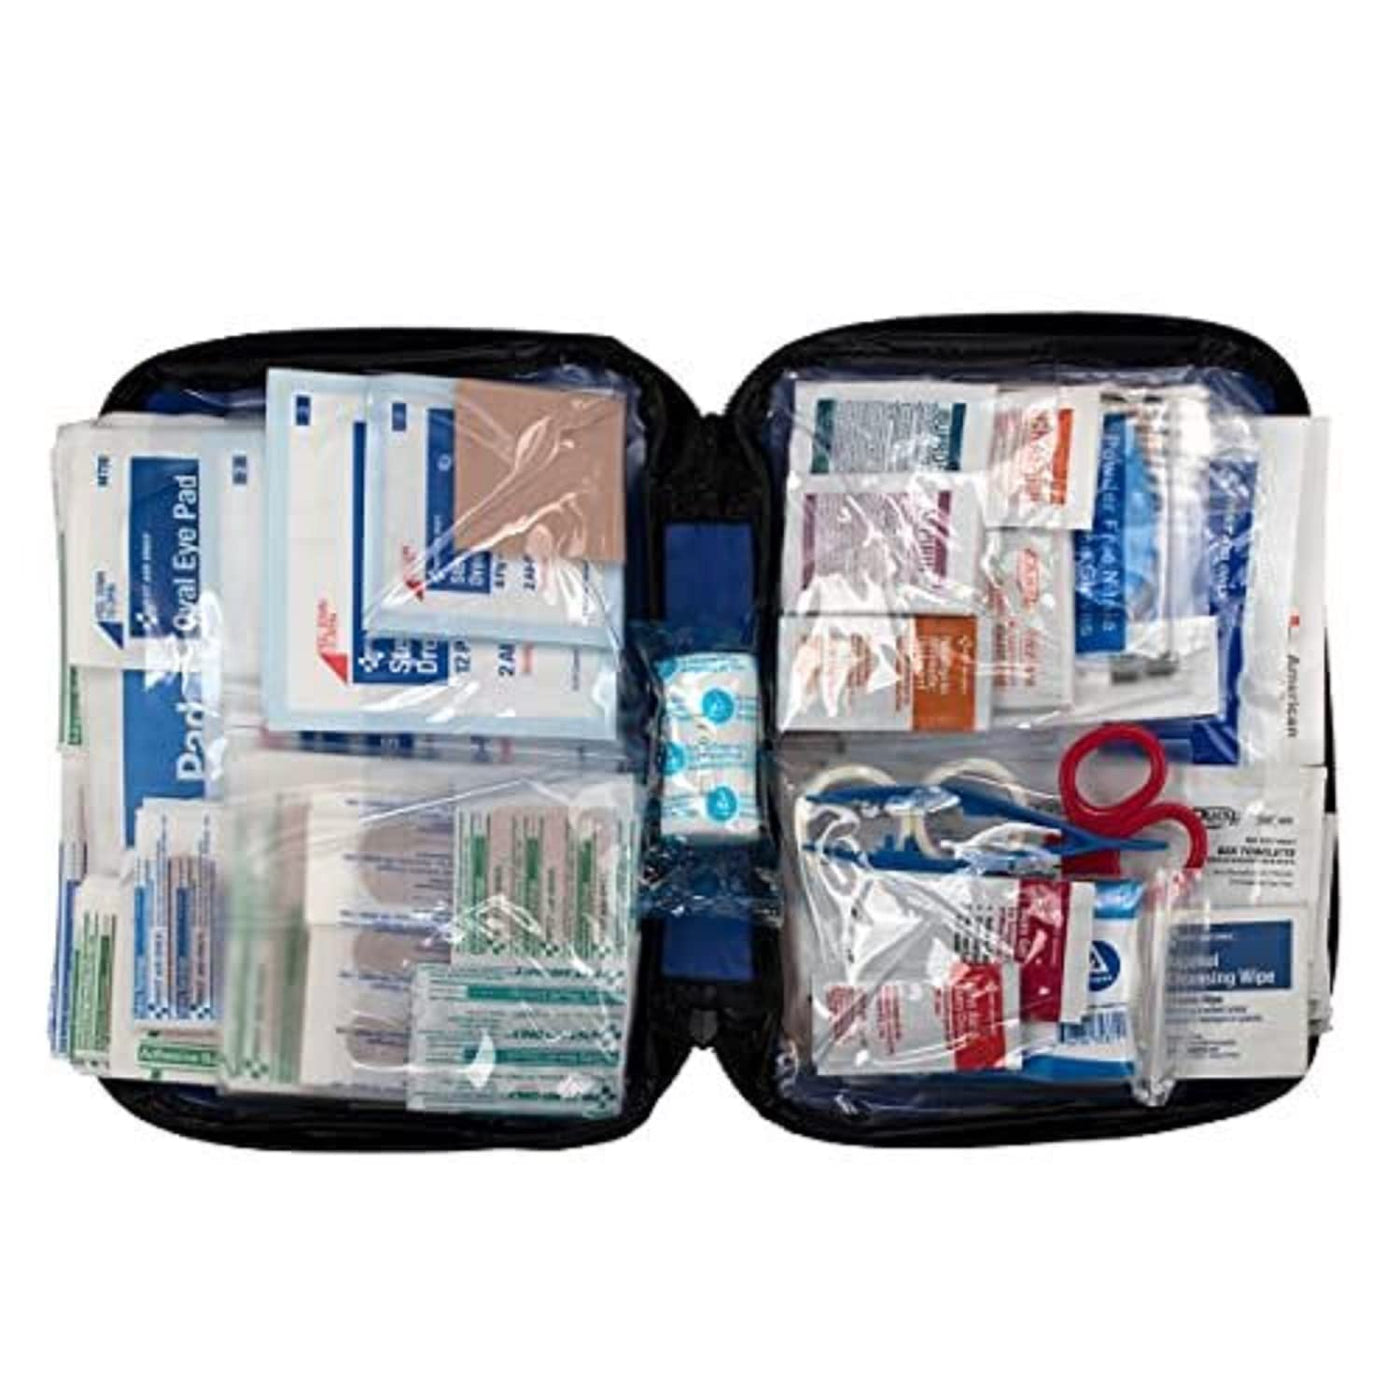 442 All-Purpose Emergency First Aid Kit for Home